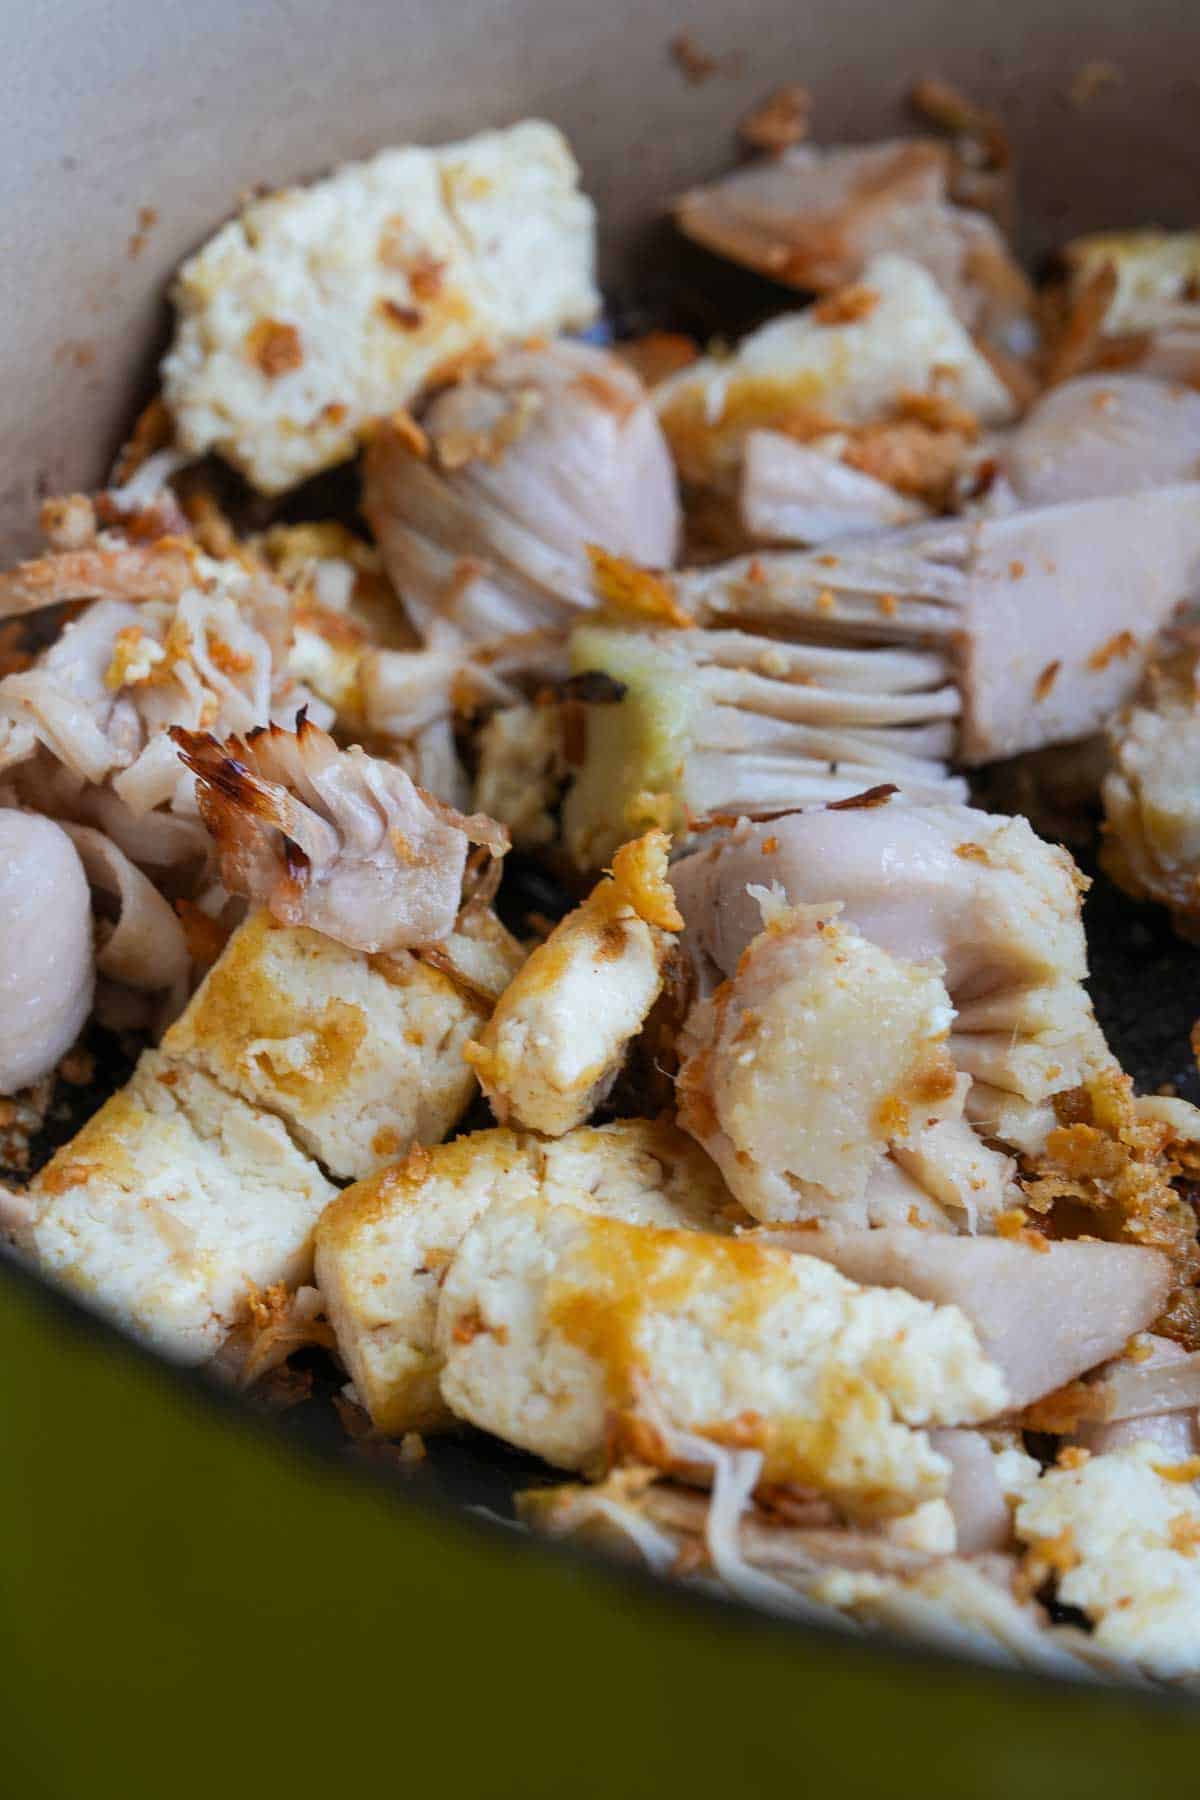 Jackfruit and tofu browning lightly in a pan.